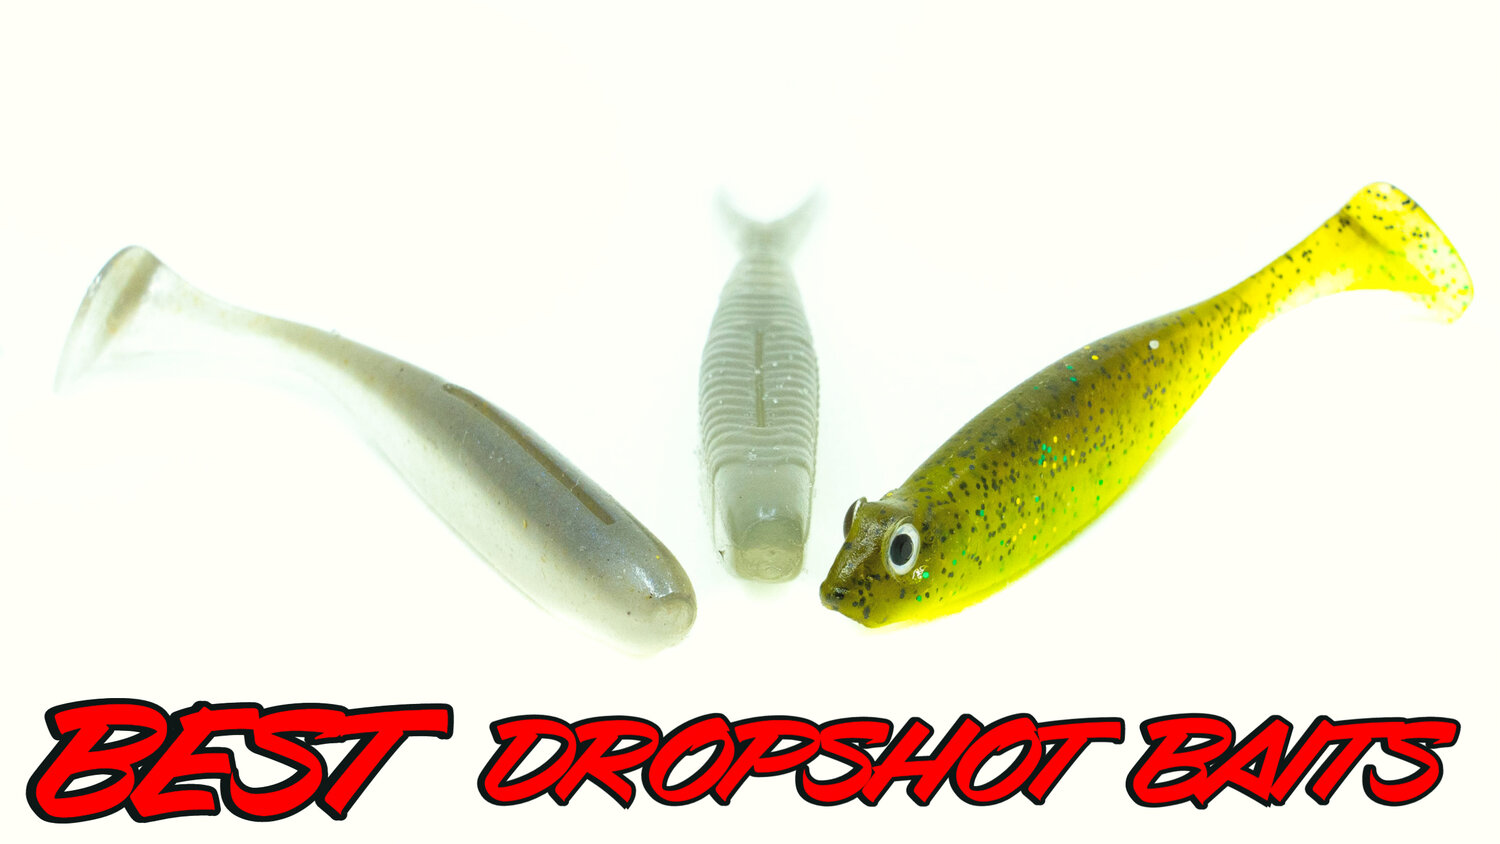 Underwater Dropshot Footage! Best Dropshot Worms For Bass Fishing